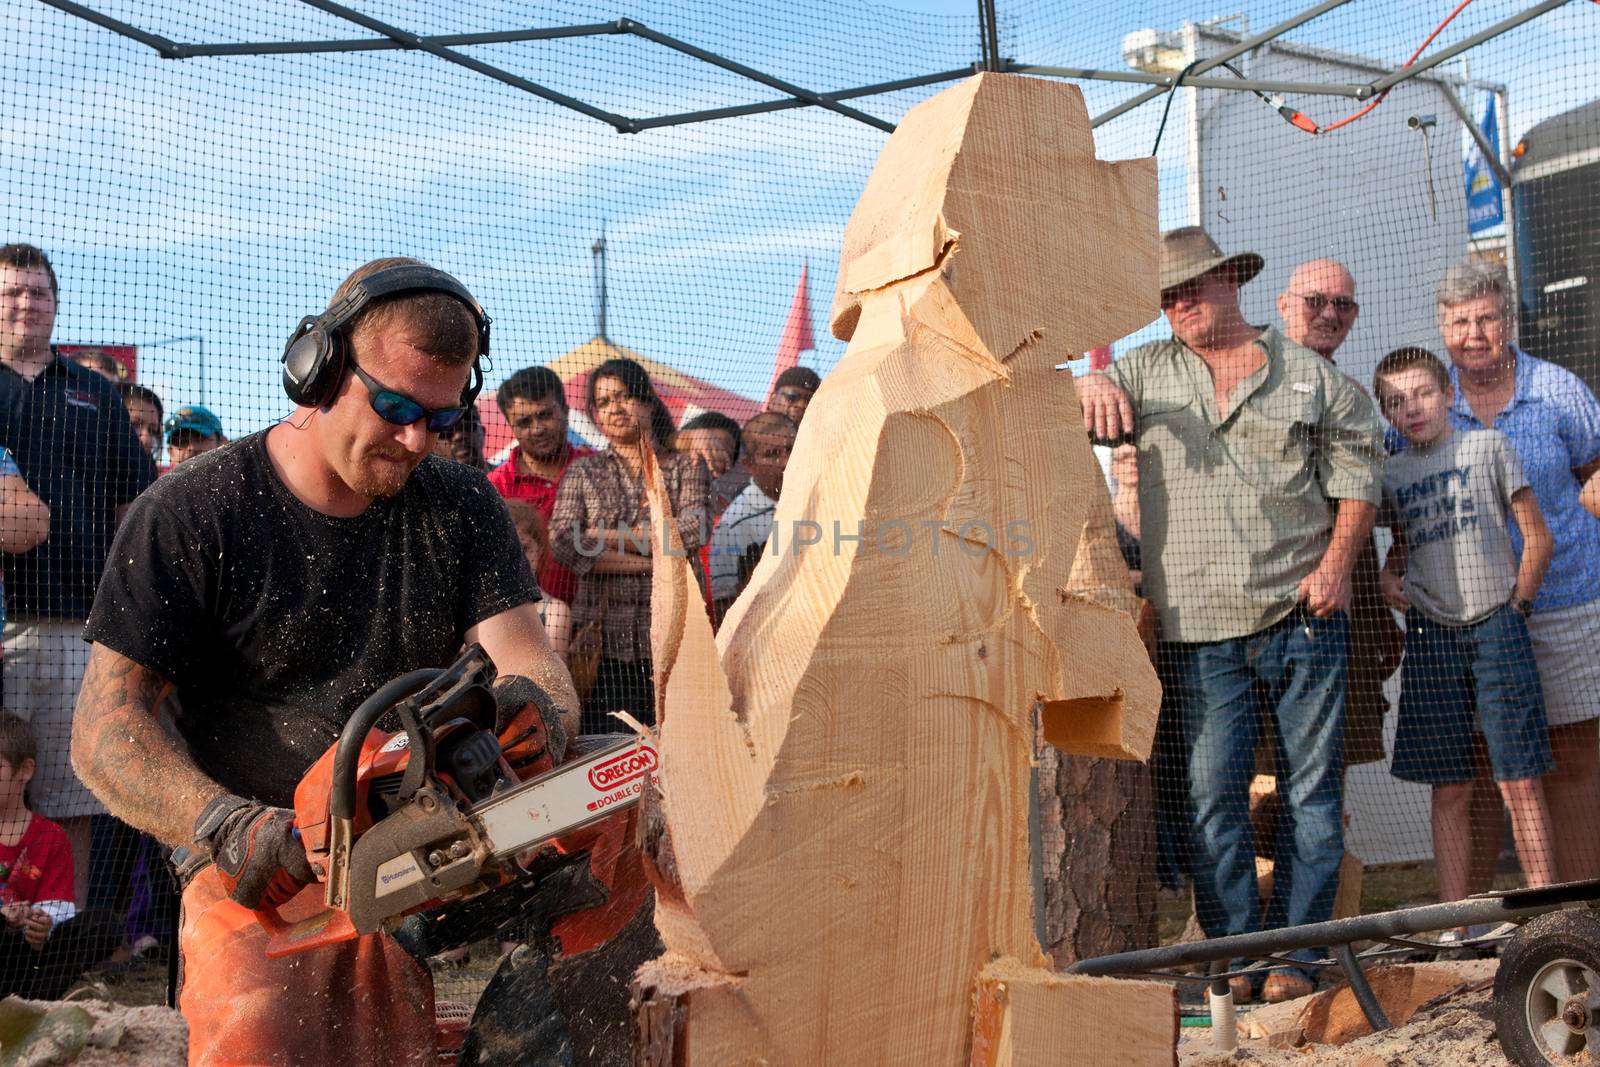 Hampton, GA, USA - September 27, 2014:  A chainsaw sculptor kneels while carving a dog sculpture out of a huge chunk of wood, at the Georgia State Fair.